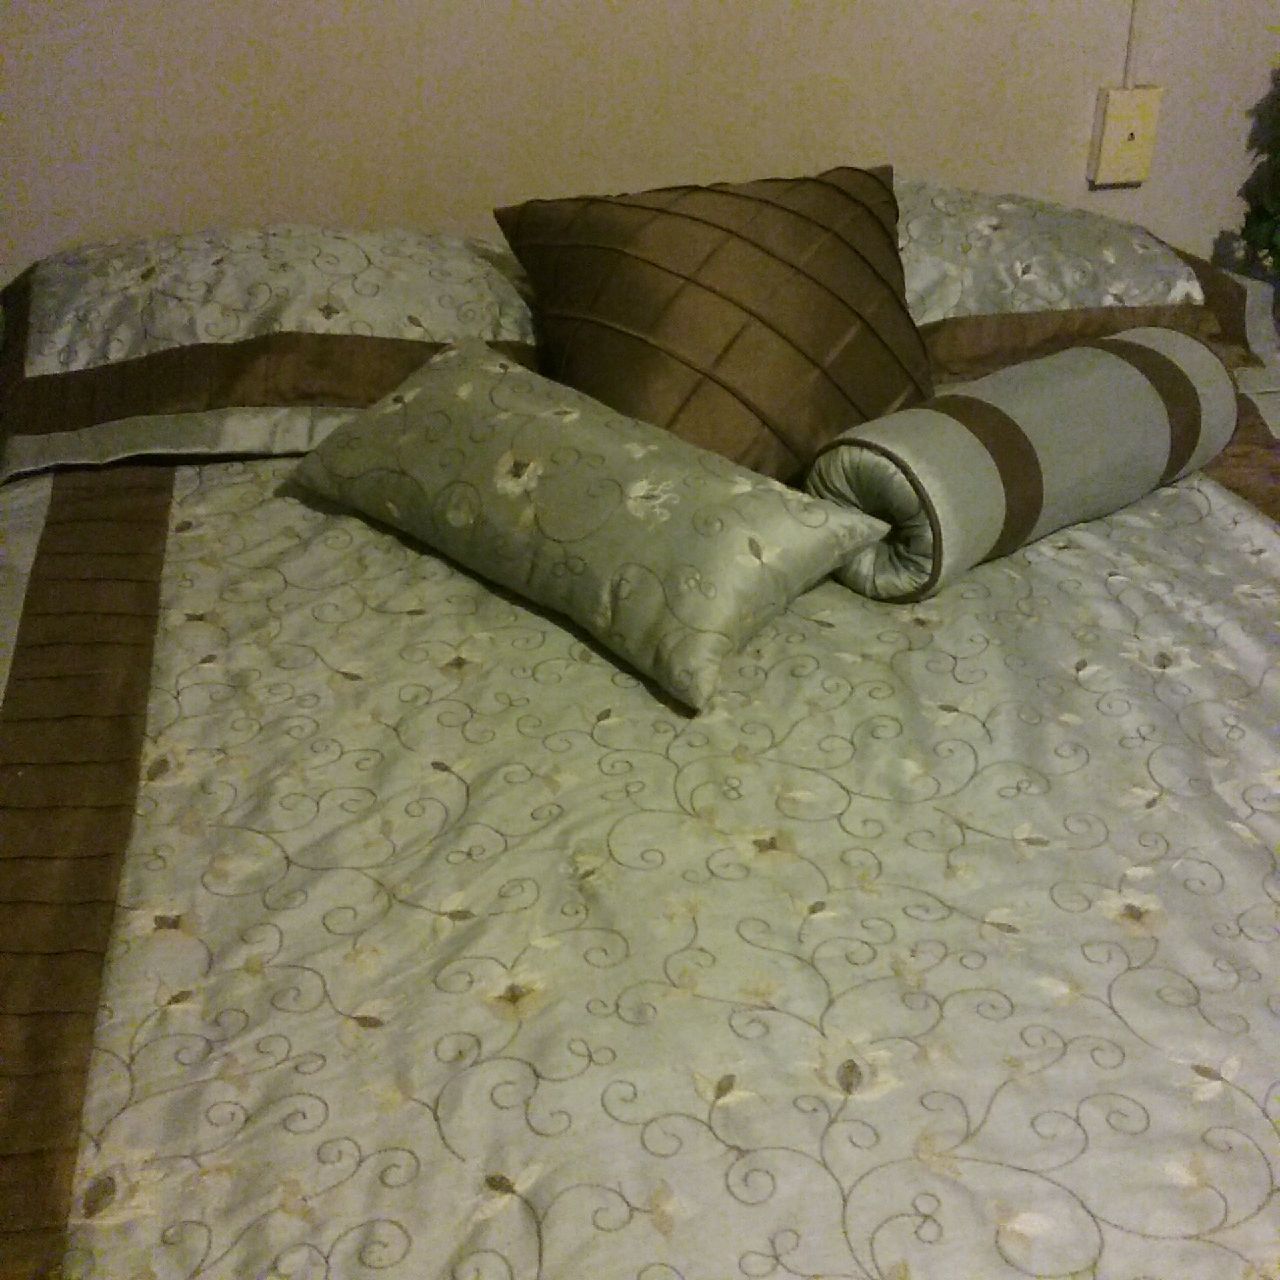 Queen size comforter seafoam green and brown stitch work 2 shams 3 decorative pillows and dust ruffle